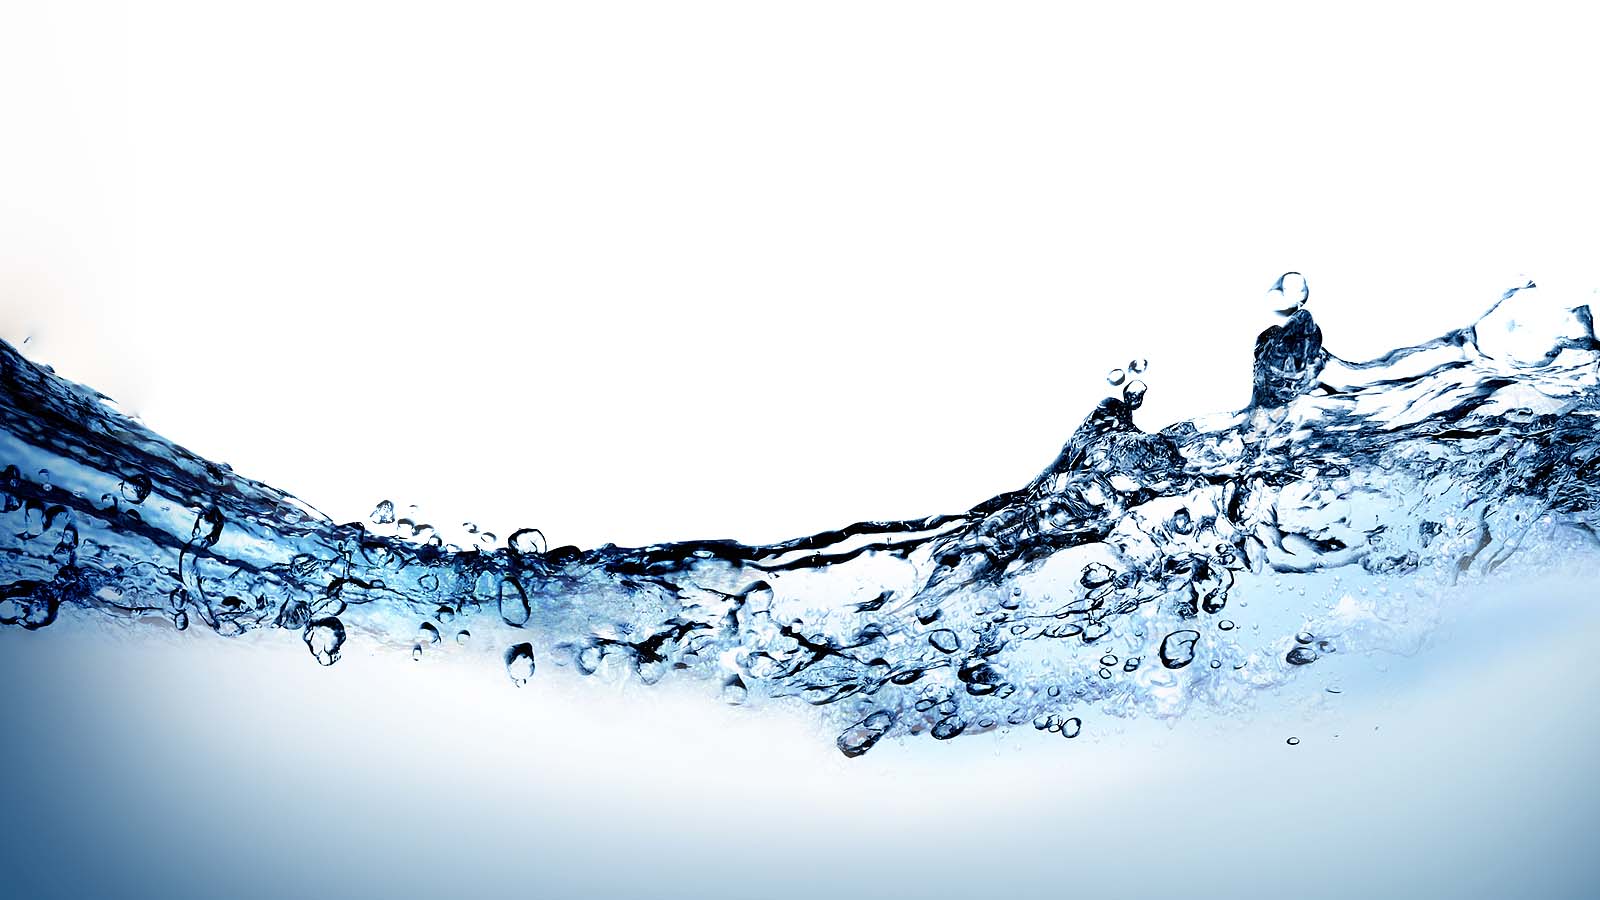 Water Background 5953 1600x900 px